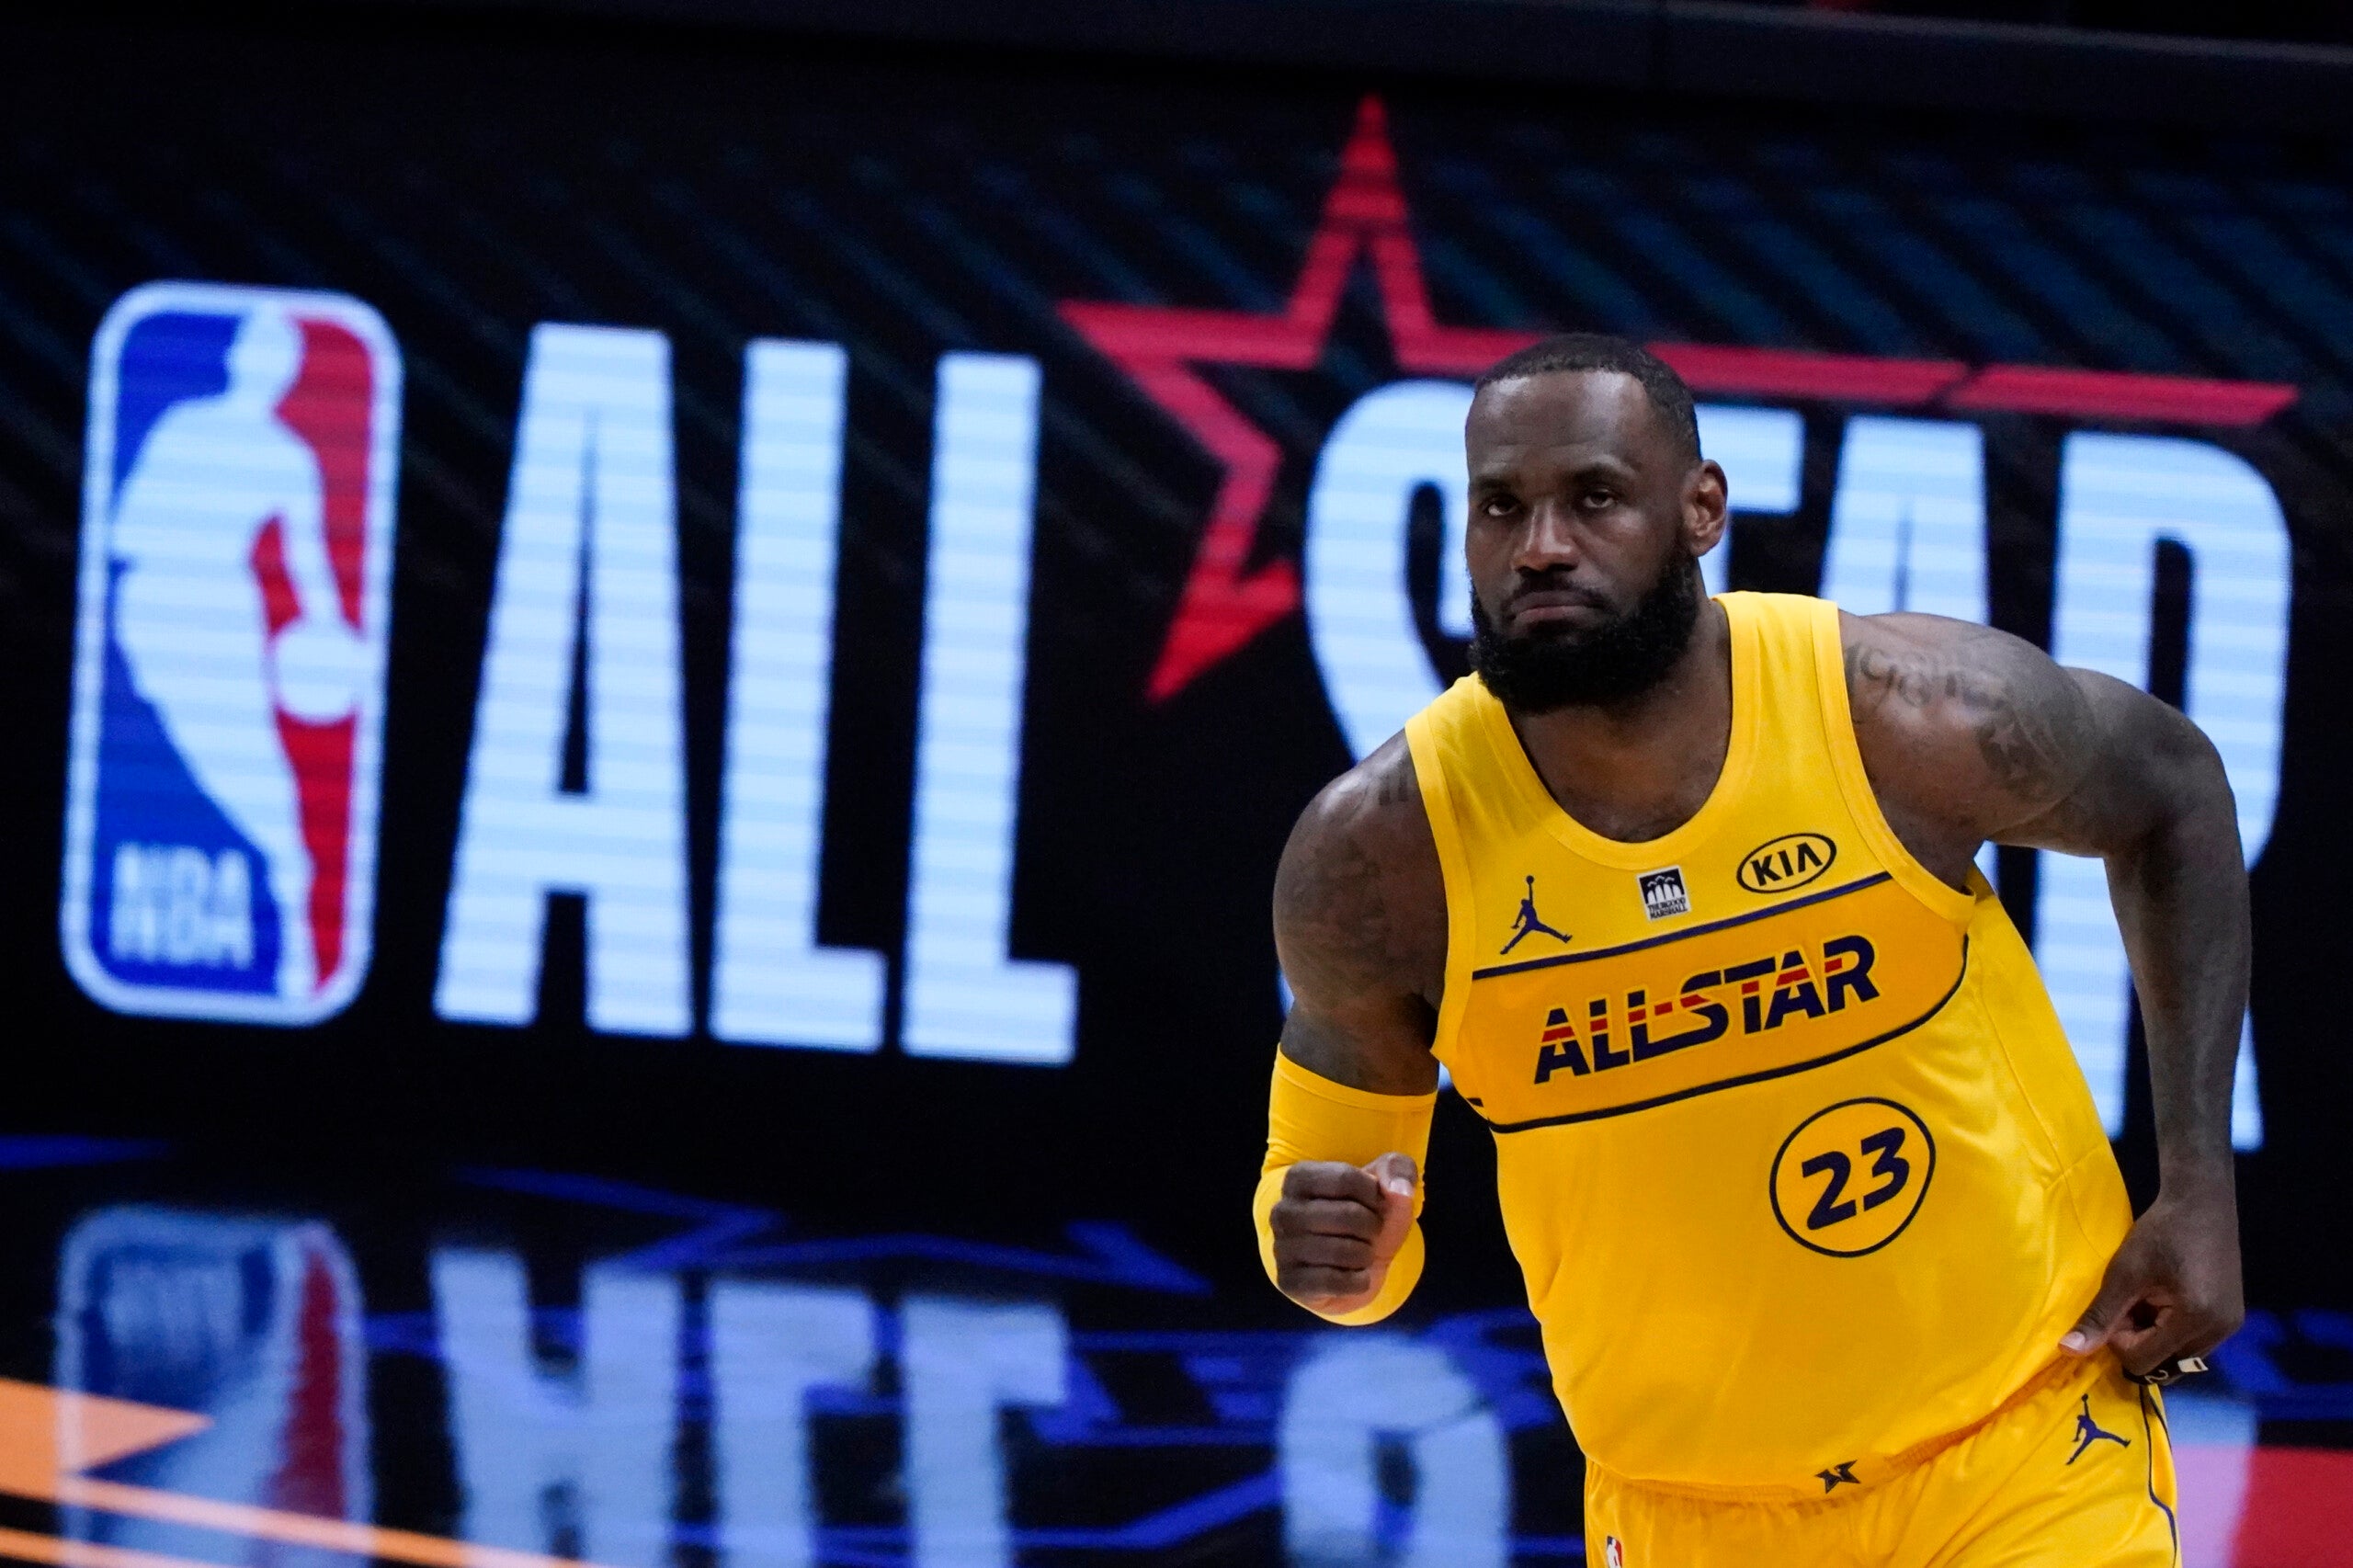 Still perfect: Team LeBron wins NBA All-Star Game 170-150 - WISH-TV, Indianapolis News, Indiana Weather